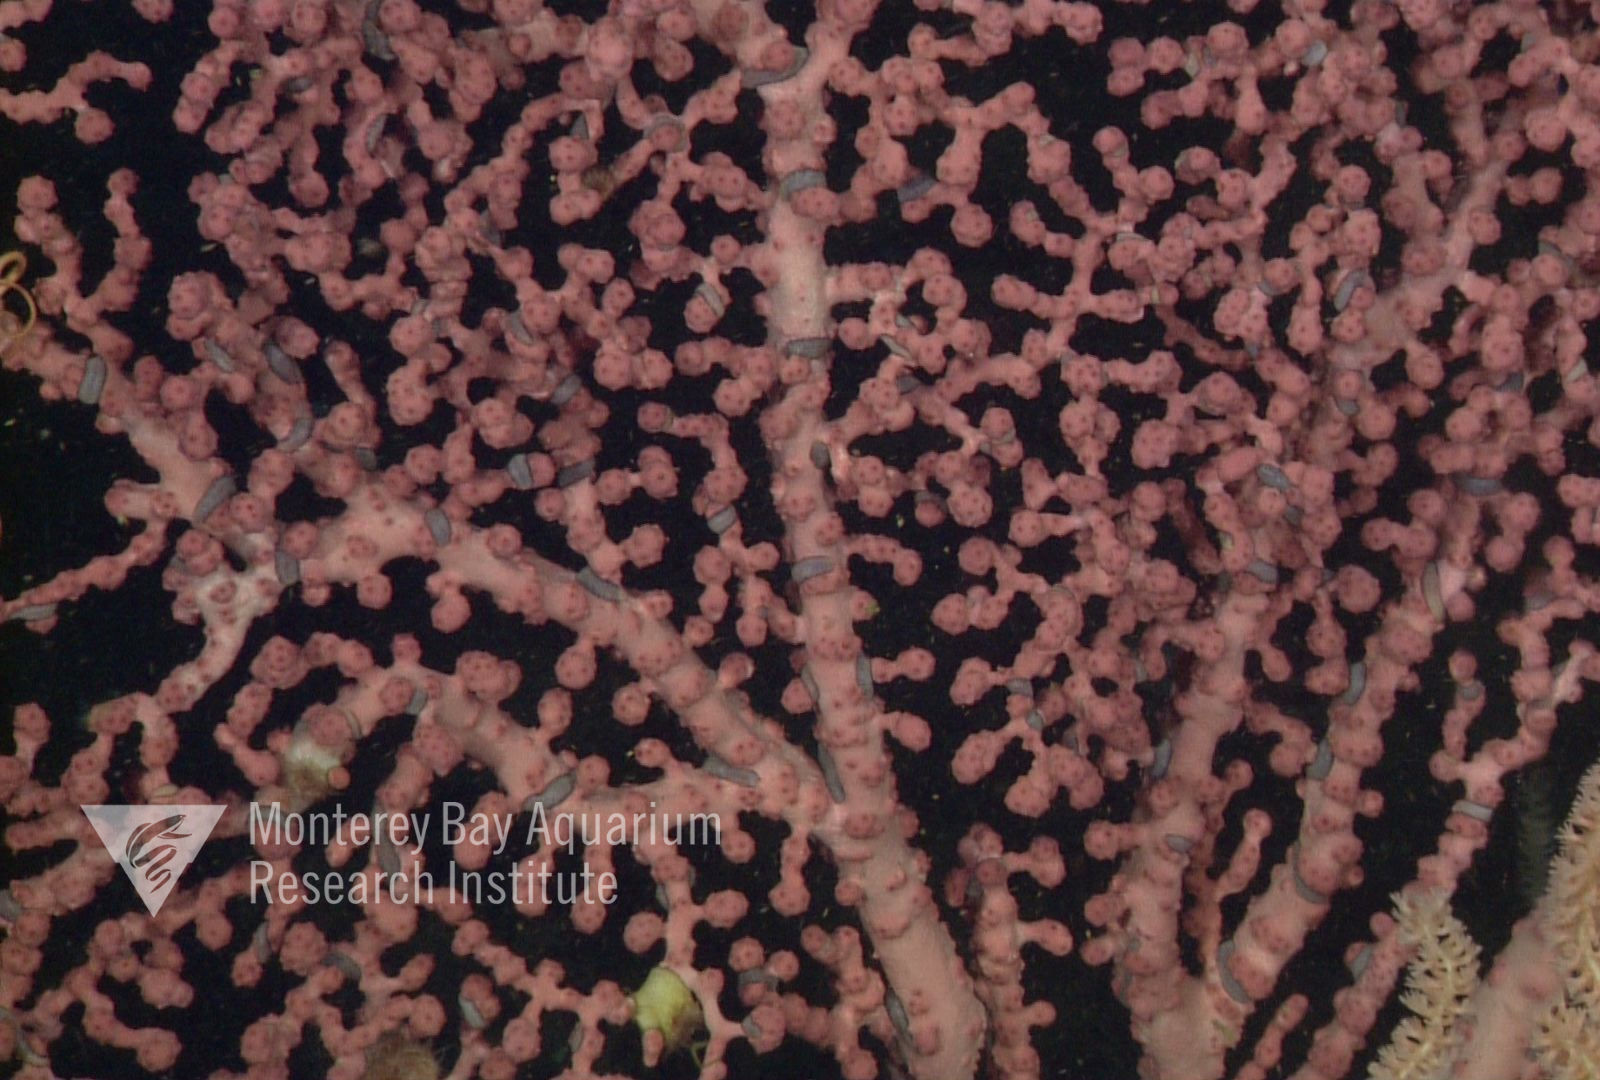 Close-up showing closed polyps and grey polynoid worms that frequently associate with this coral.